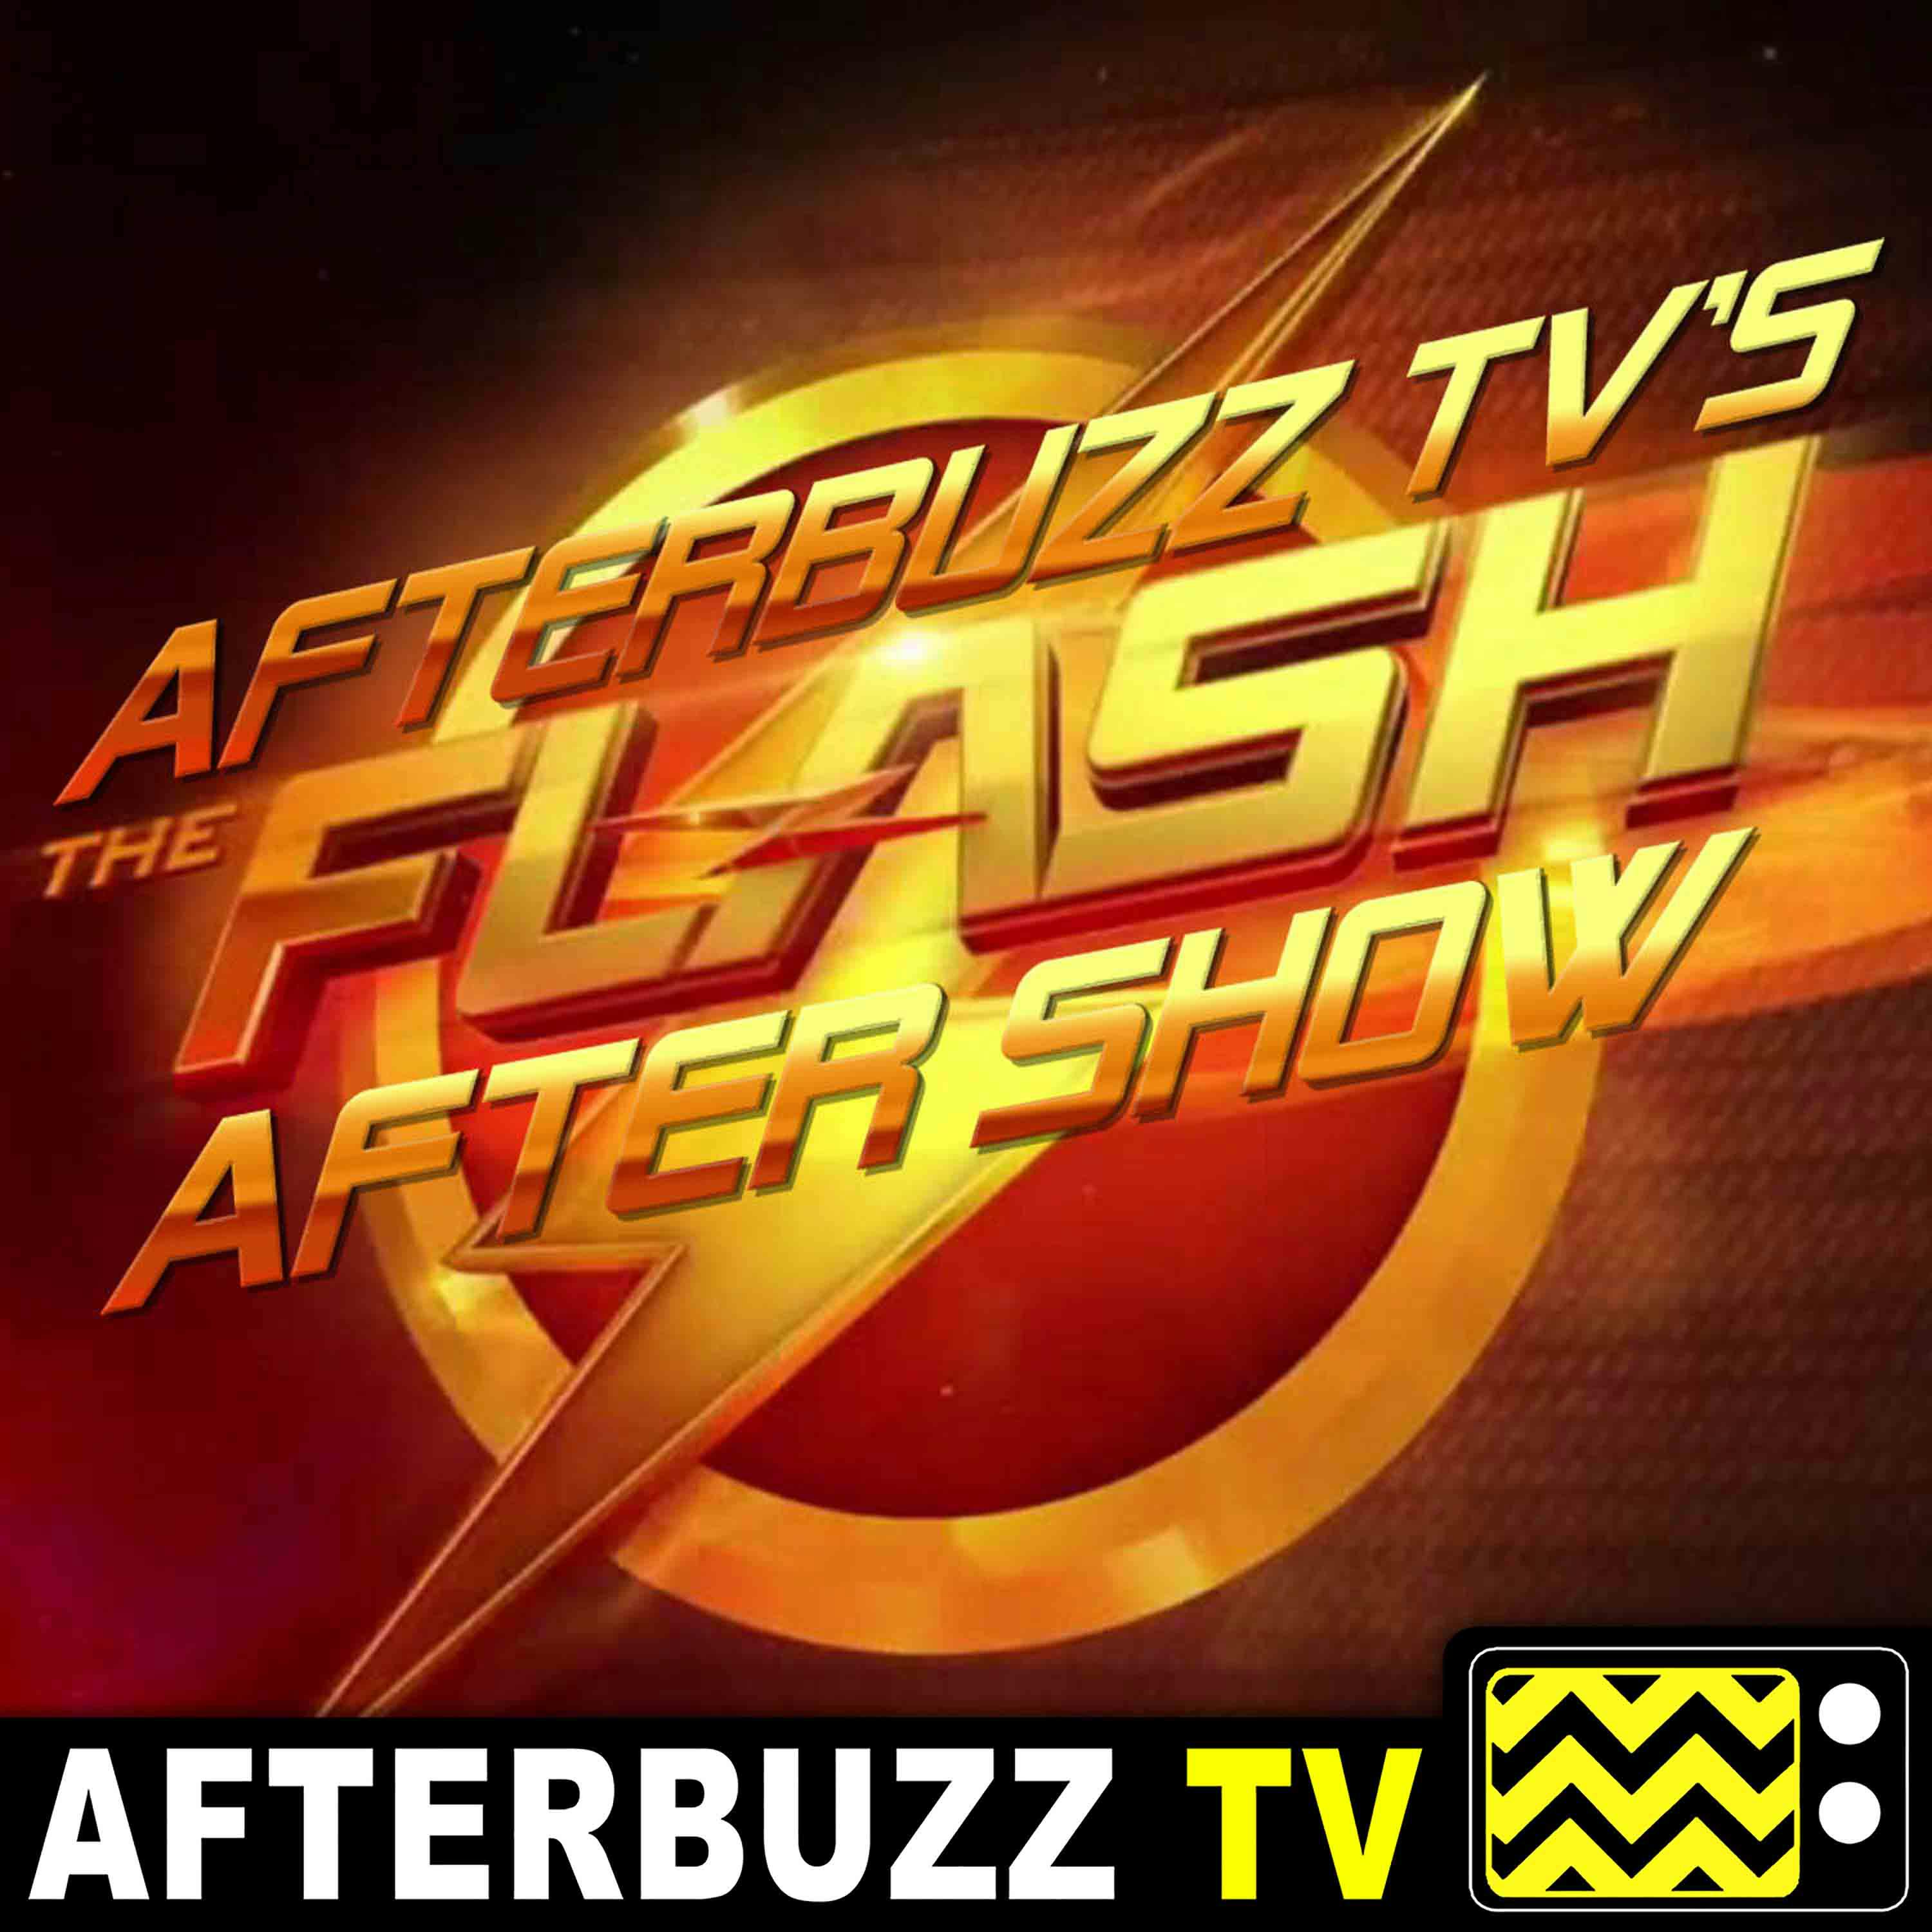 "Snow Pack" Season 5 Episode 19 'The Flash' Review